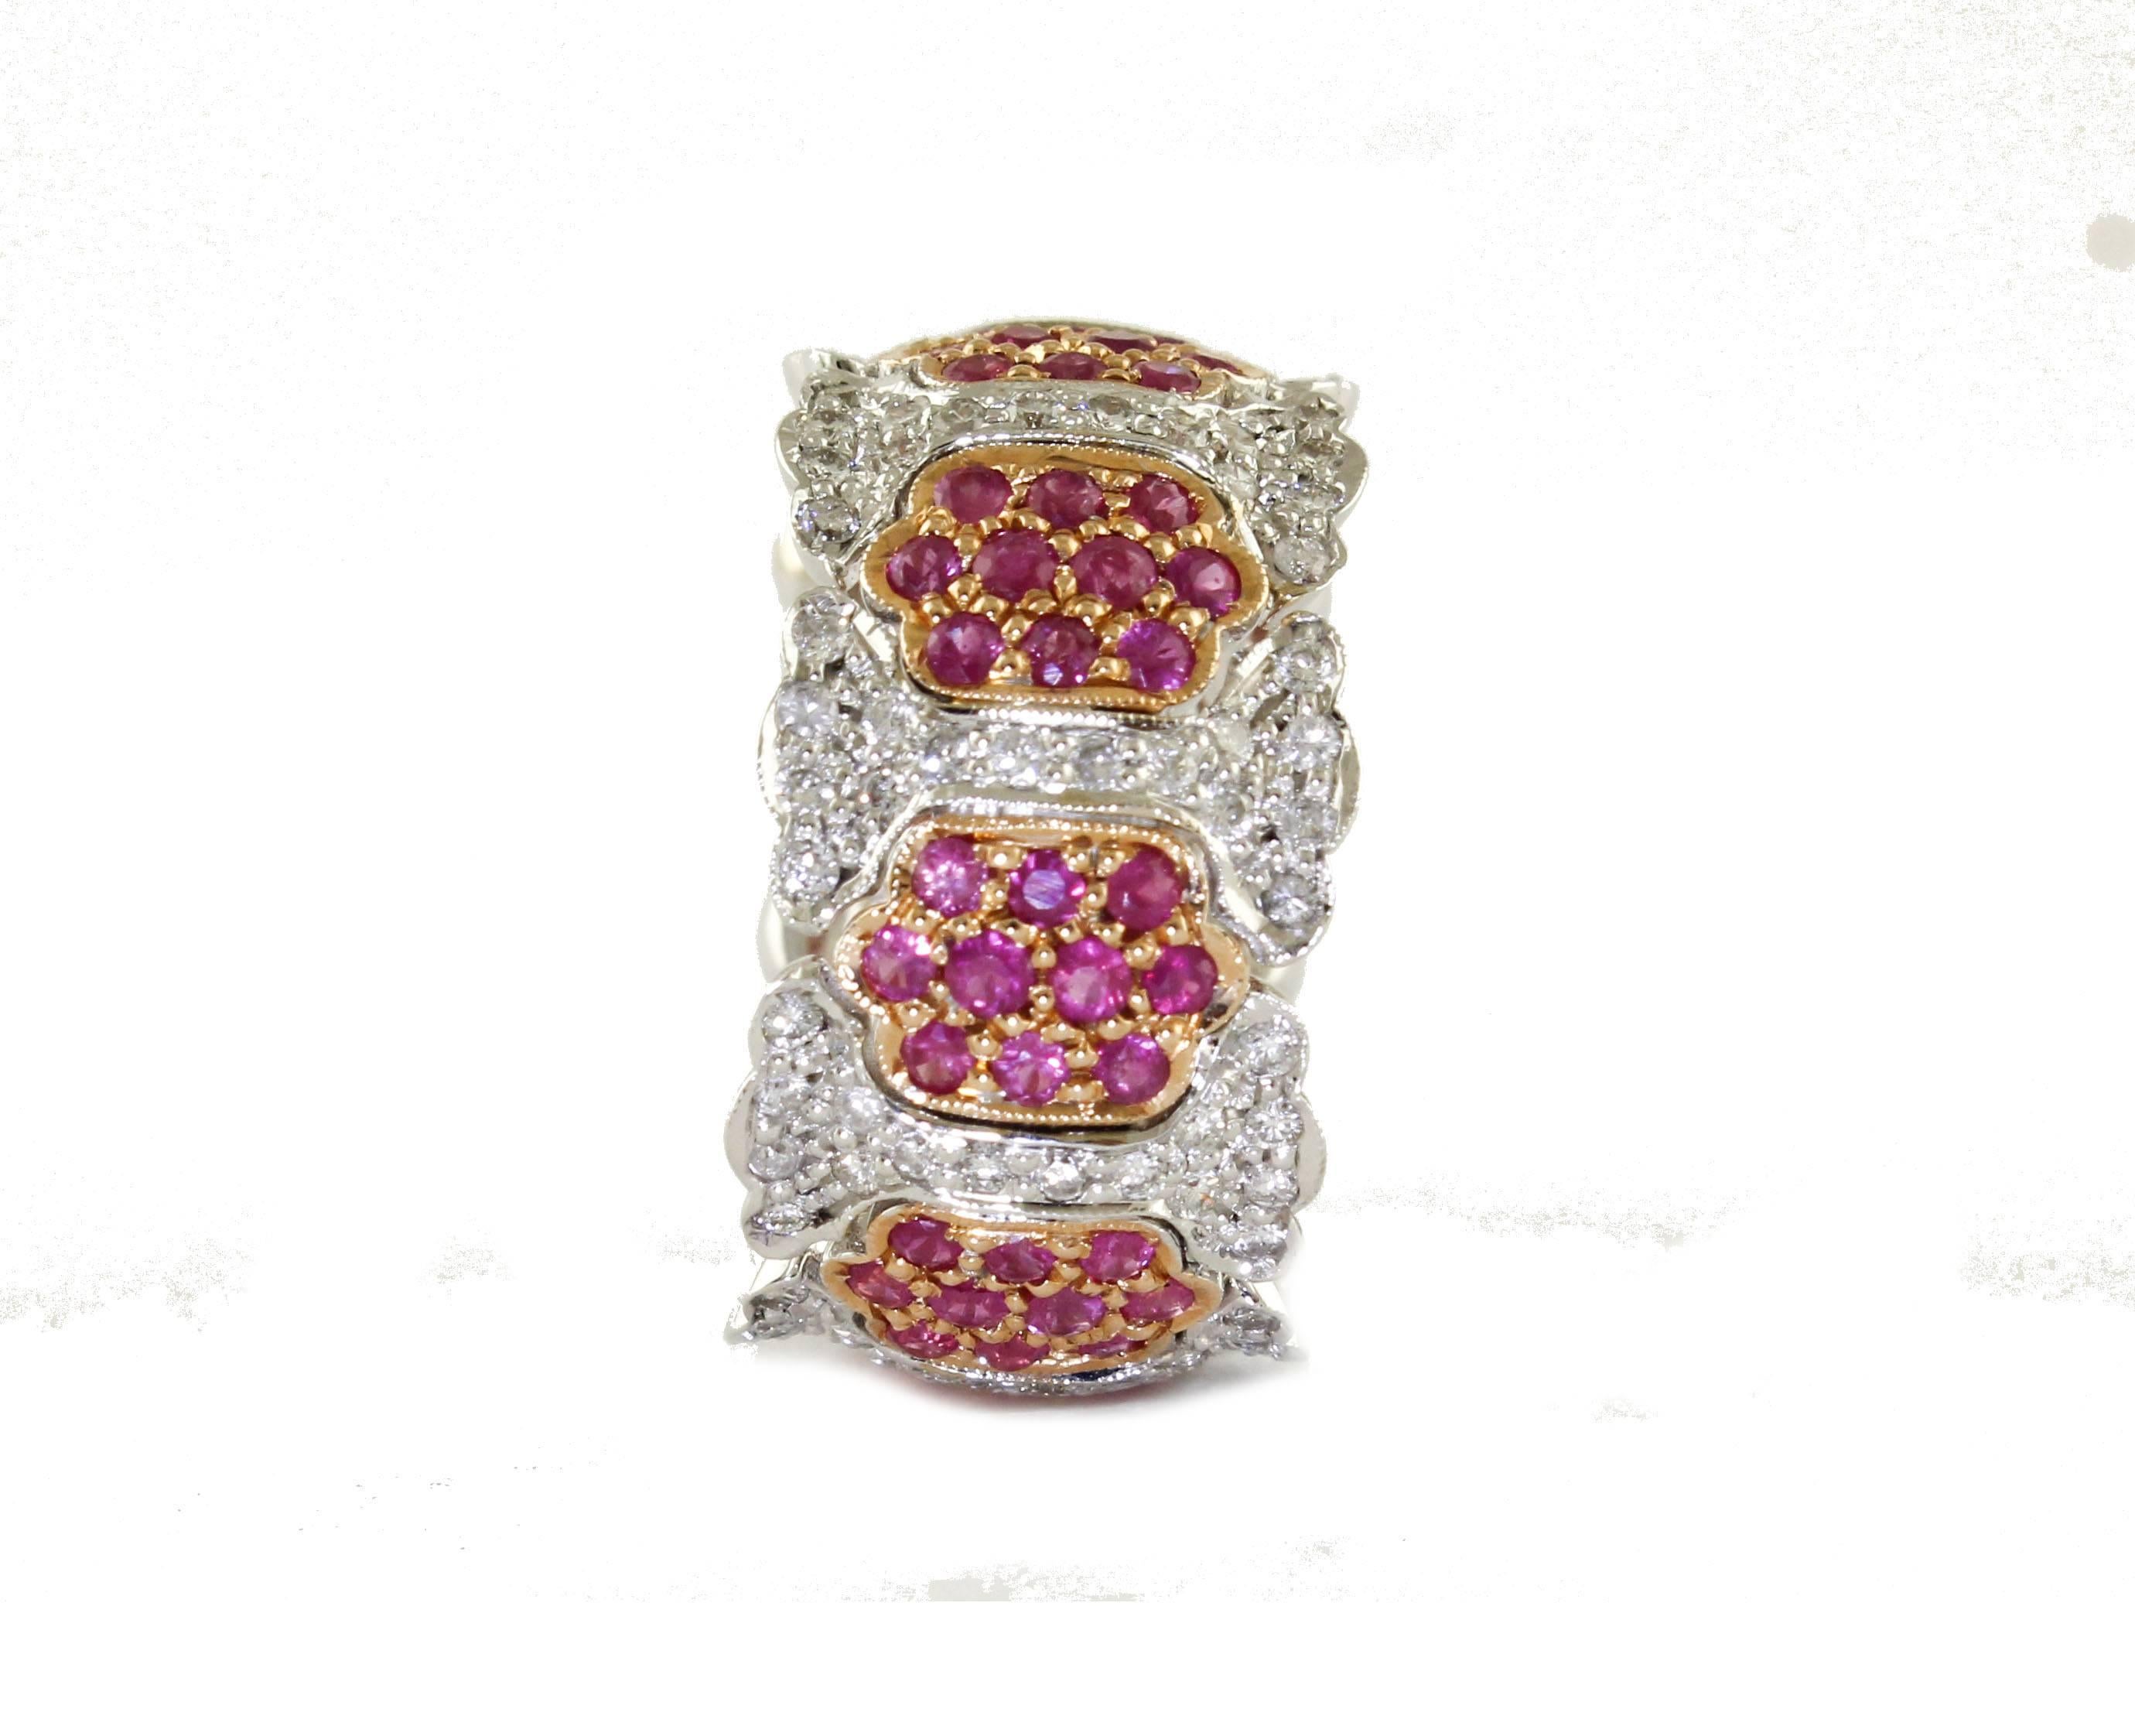 Band ring in 14 kt white and rose gold mounted with diamonds and rubies.
Diamonds ct 1.25
Rubies ct 2.18
Tot.Weight 7.90 g
R.F ofoe
Size usa 7 ita 15 french 55
